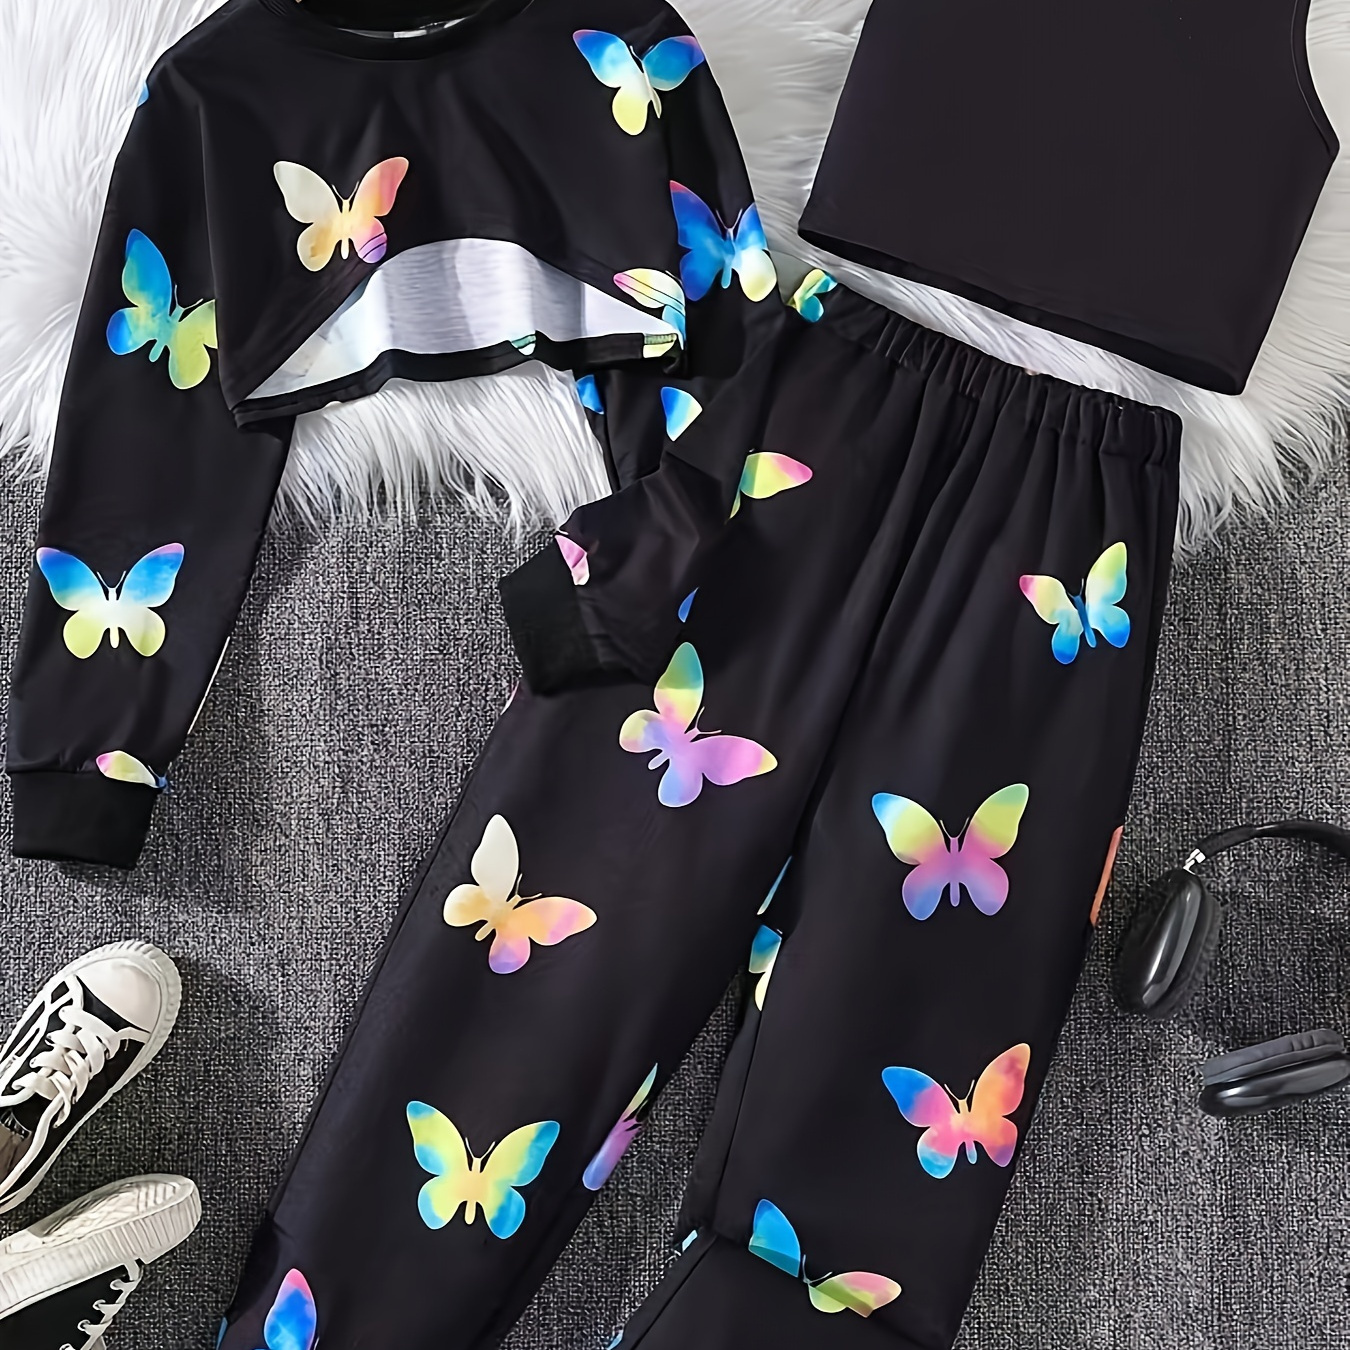 

Butterfly Print Girl's Sporty Chic Outfit, Crop T-shirt + Tank Top + Jogger Pants Co-ords Set - Sweet & Fashion Spring Fall Outfit